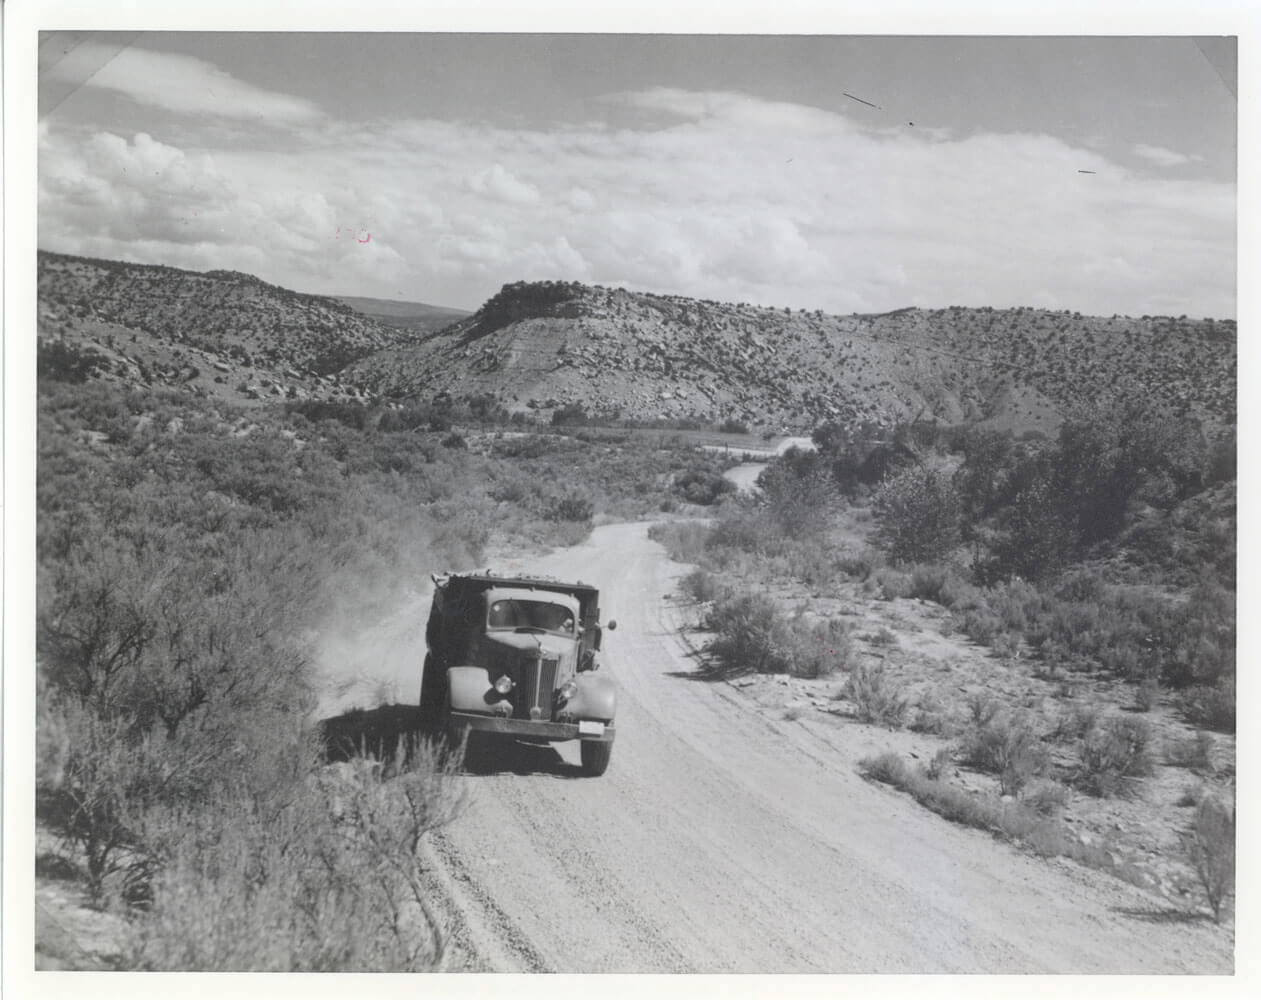 Uranium ore on the way to a processing mill on the Colorado Plateau. William Chenoweth Collection, Museums of Western Colorado.